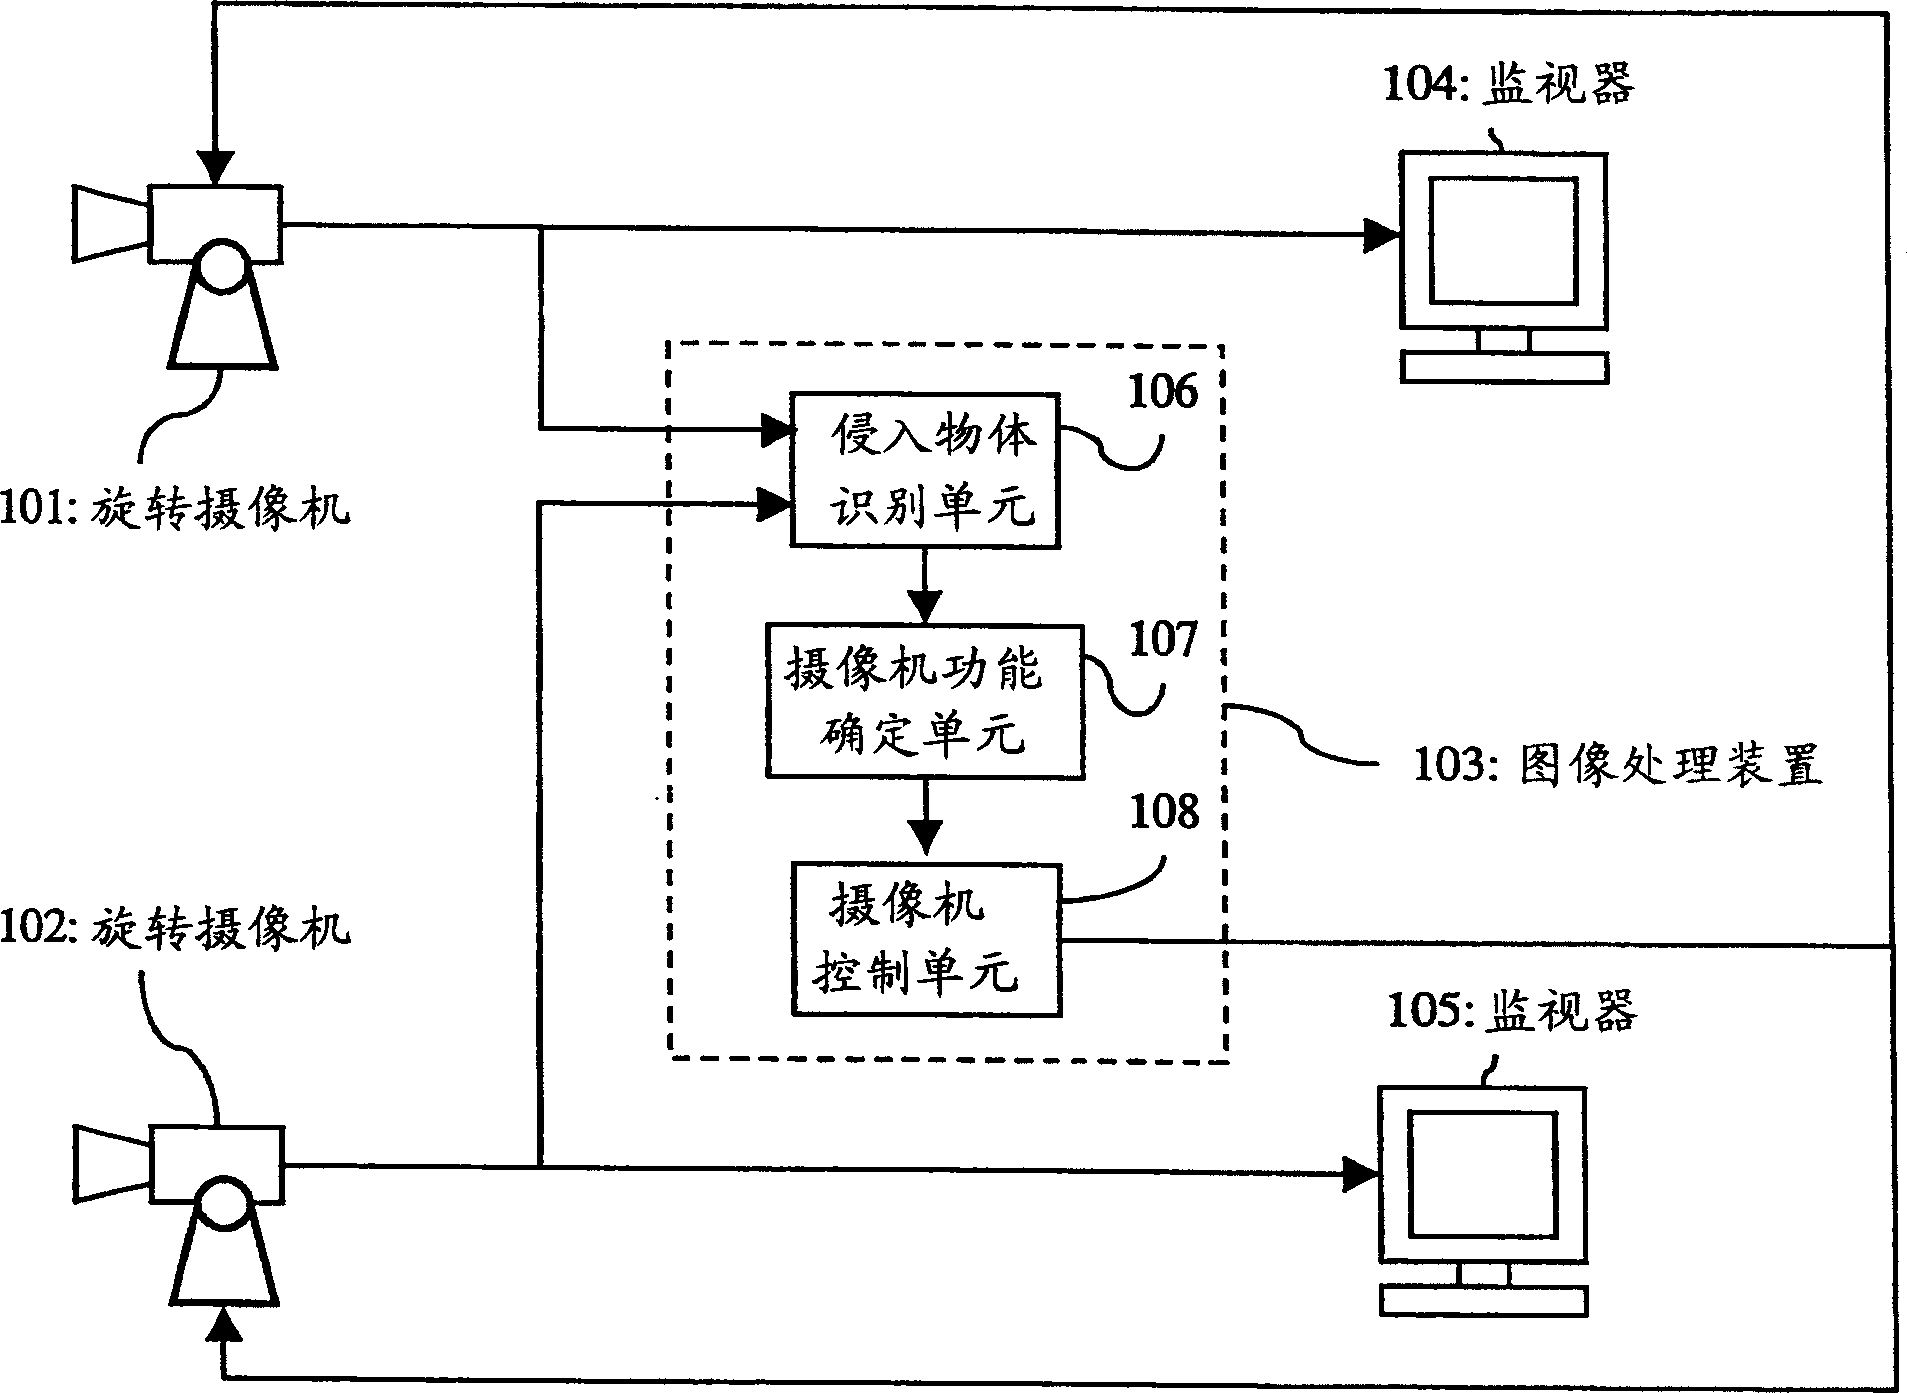 Monitoring device composed of united video camera